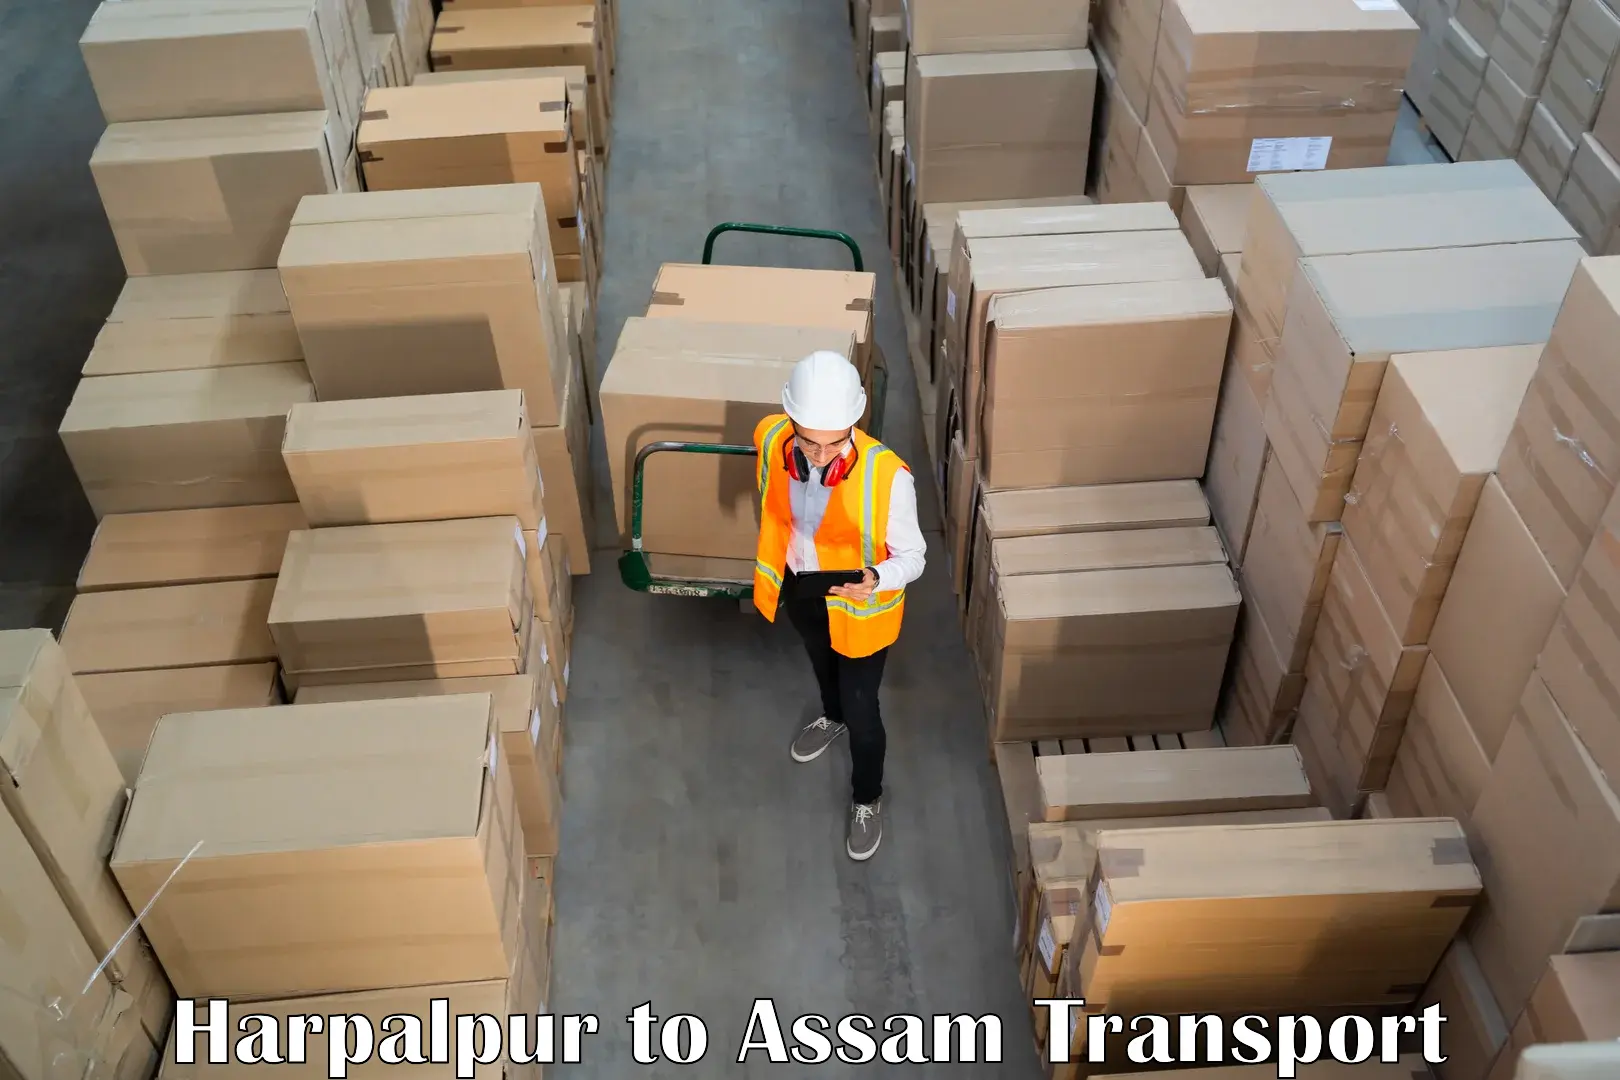 Shipping services Harpalpur to Dibrugarh